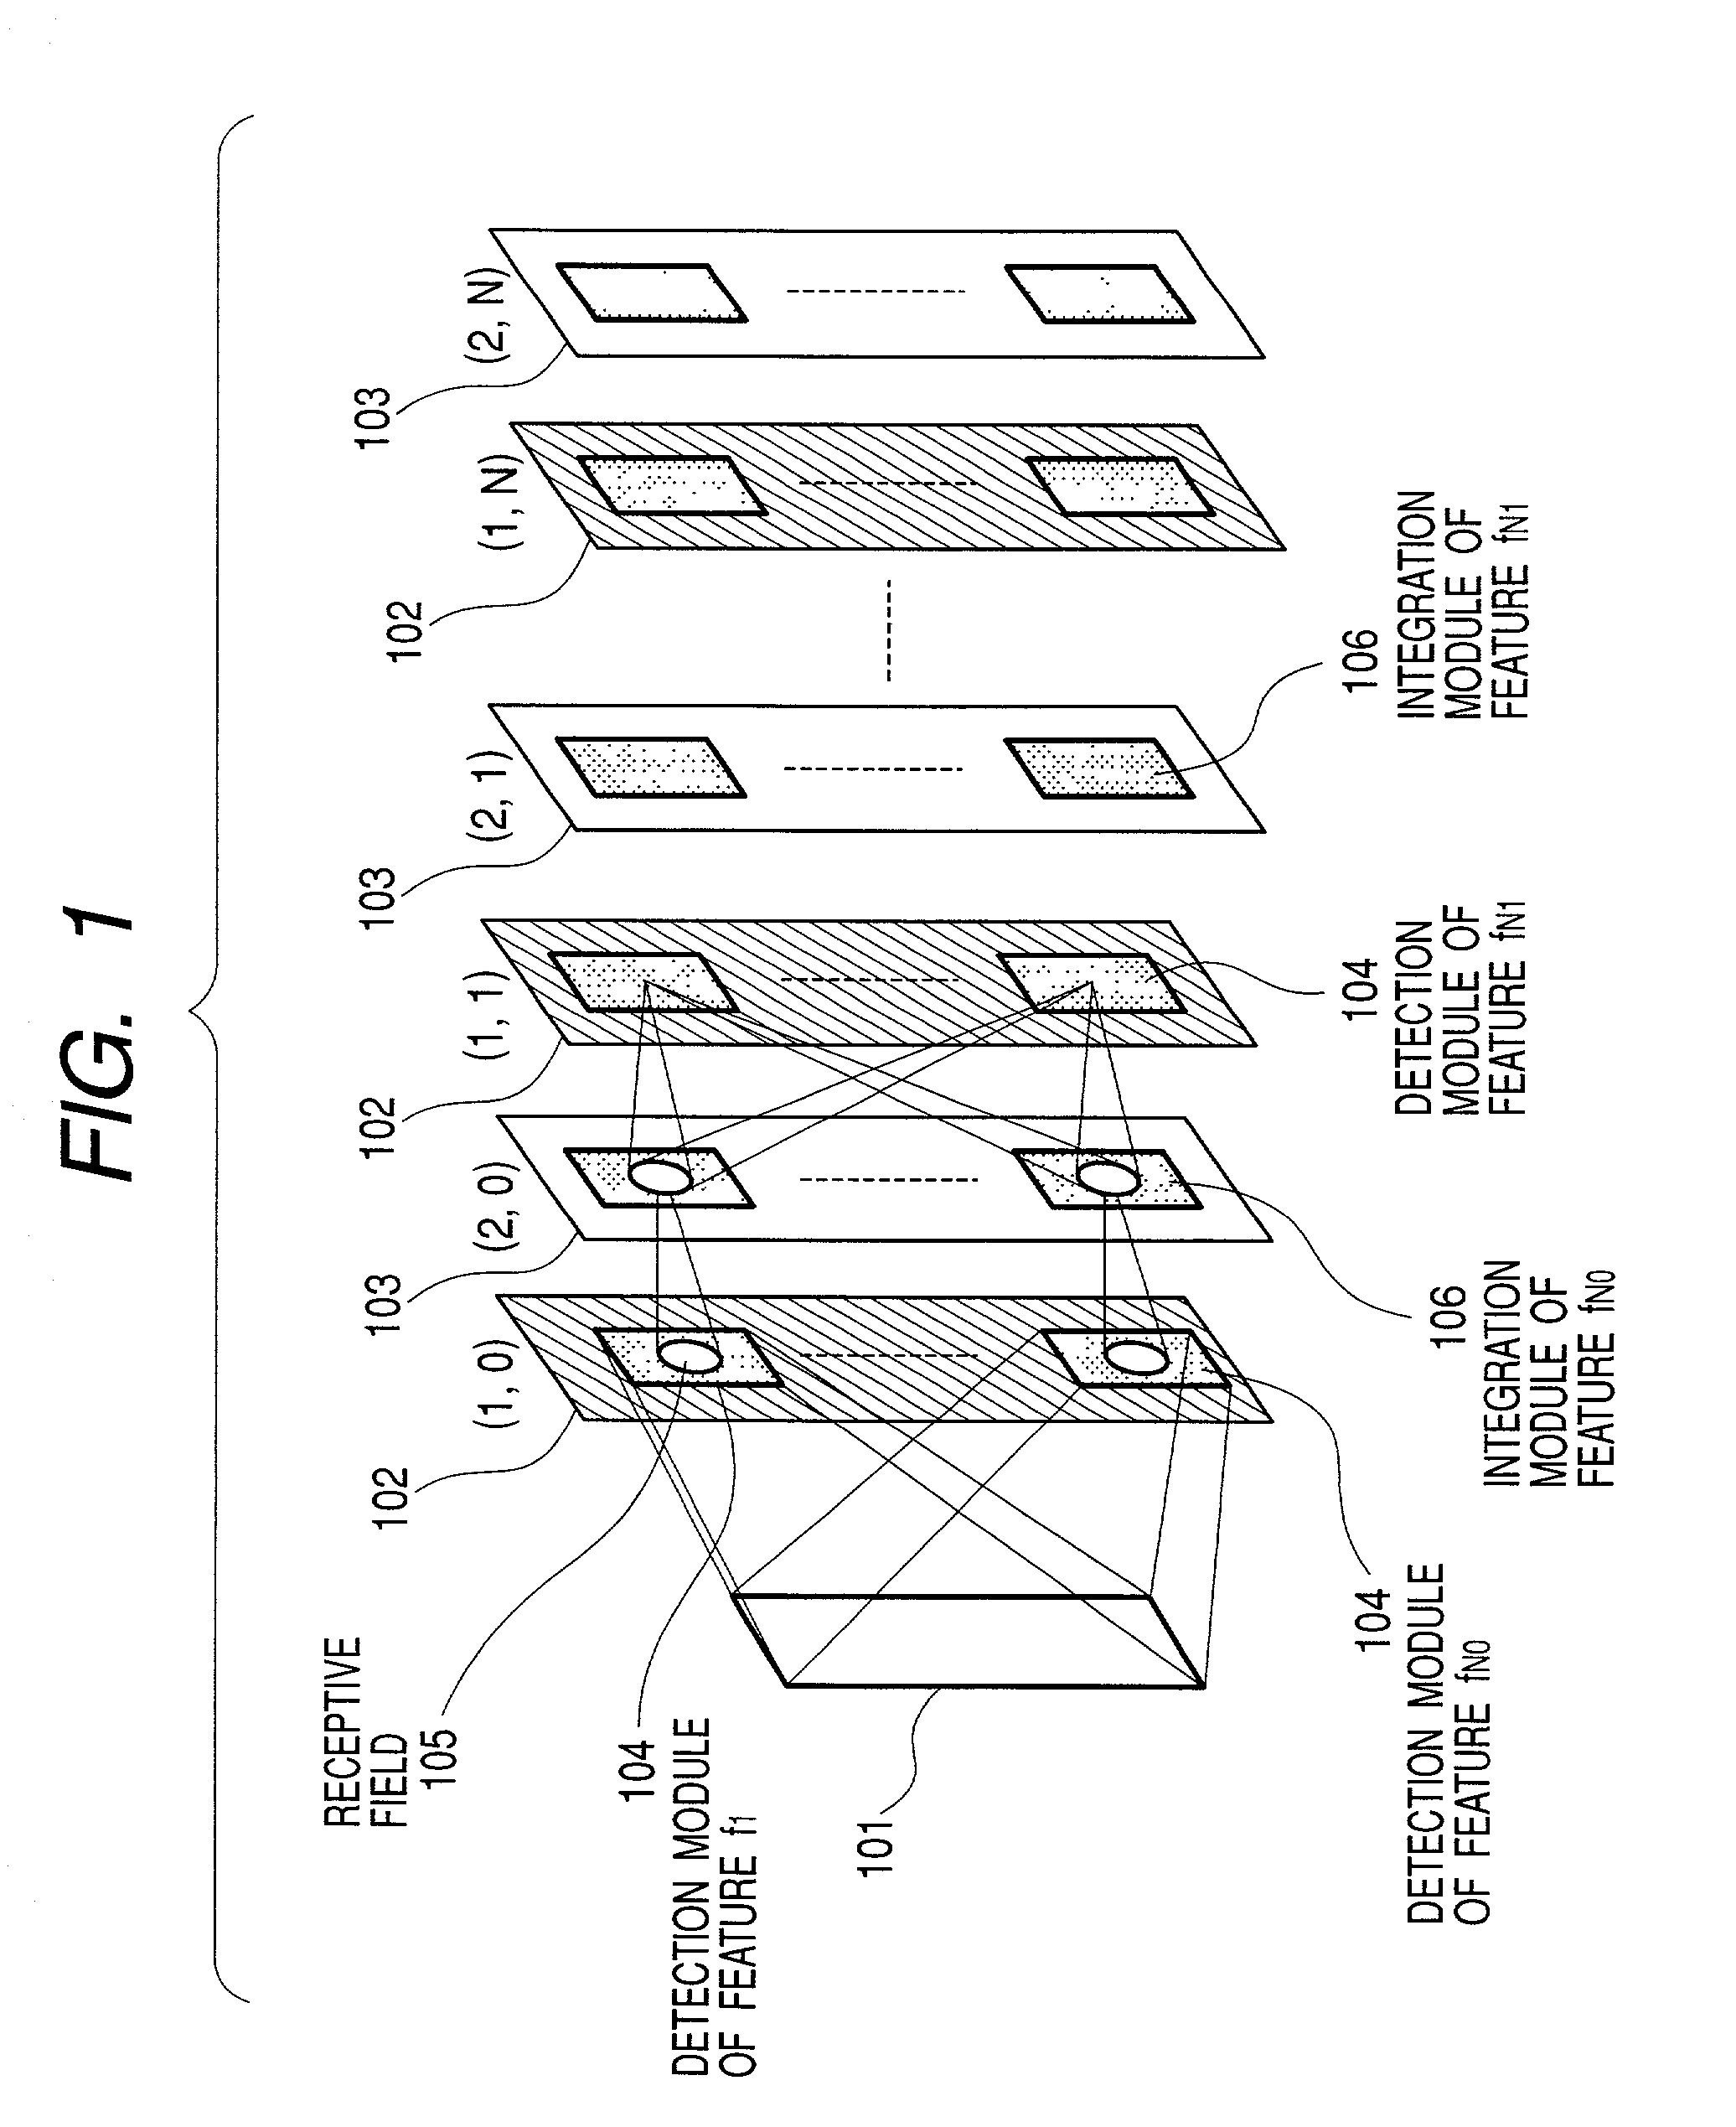 Pulse signal circuit, parallel processing circuit, pattern recognition system, and image input system